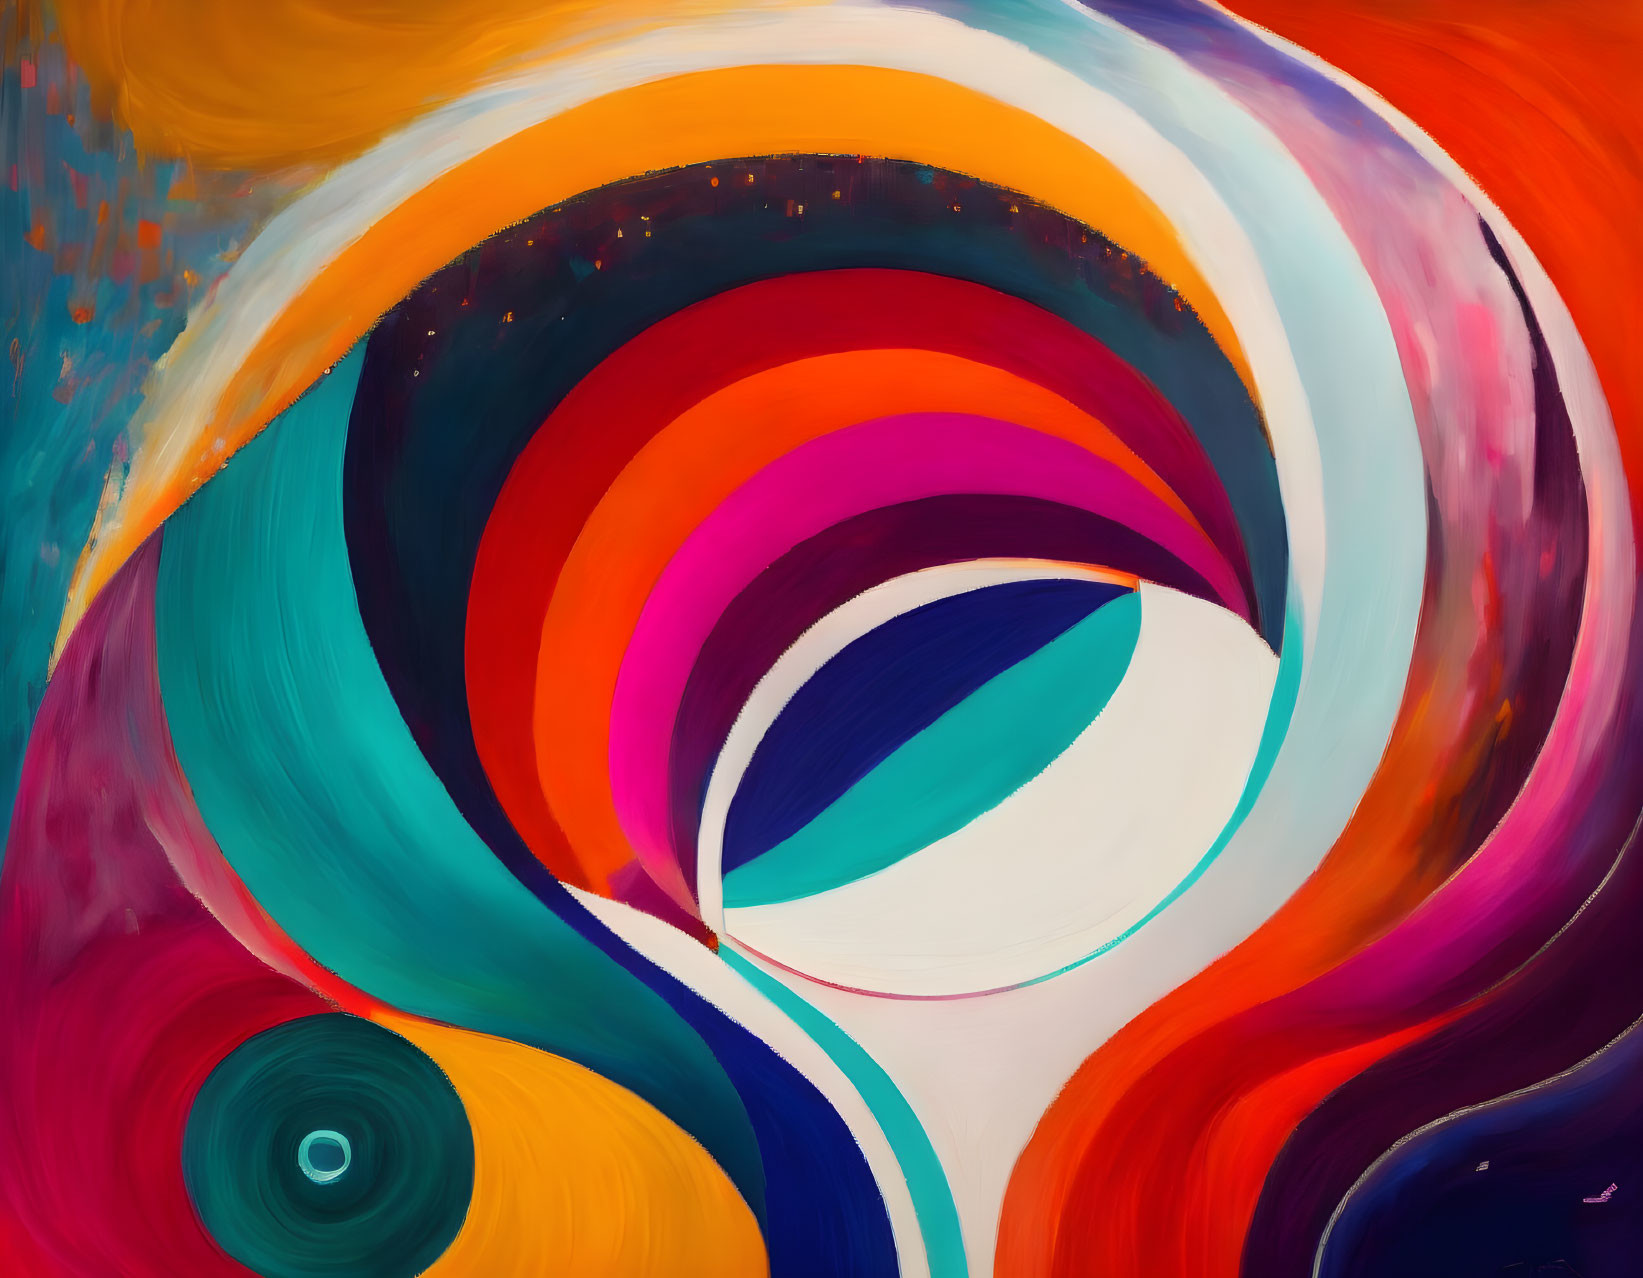 Colorful Abstract Painting with Swirling Forms in Red, Orange, Blue, Purple Hues